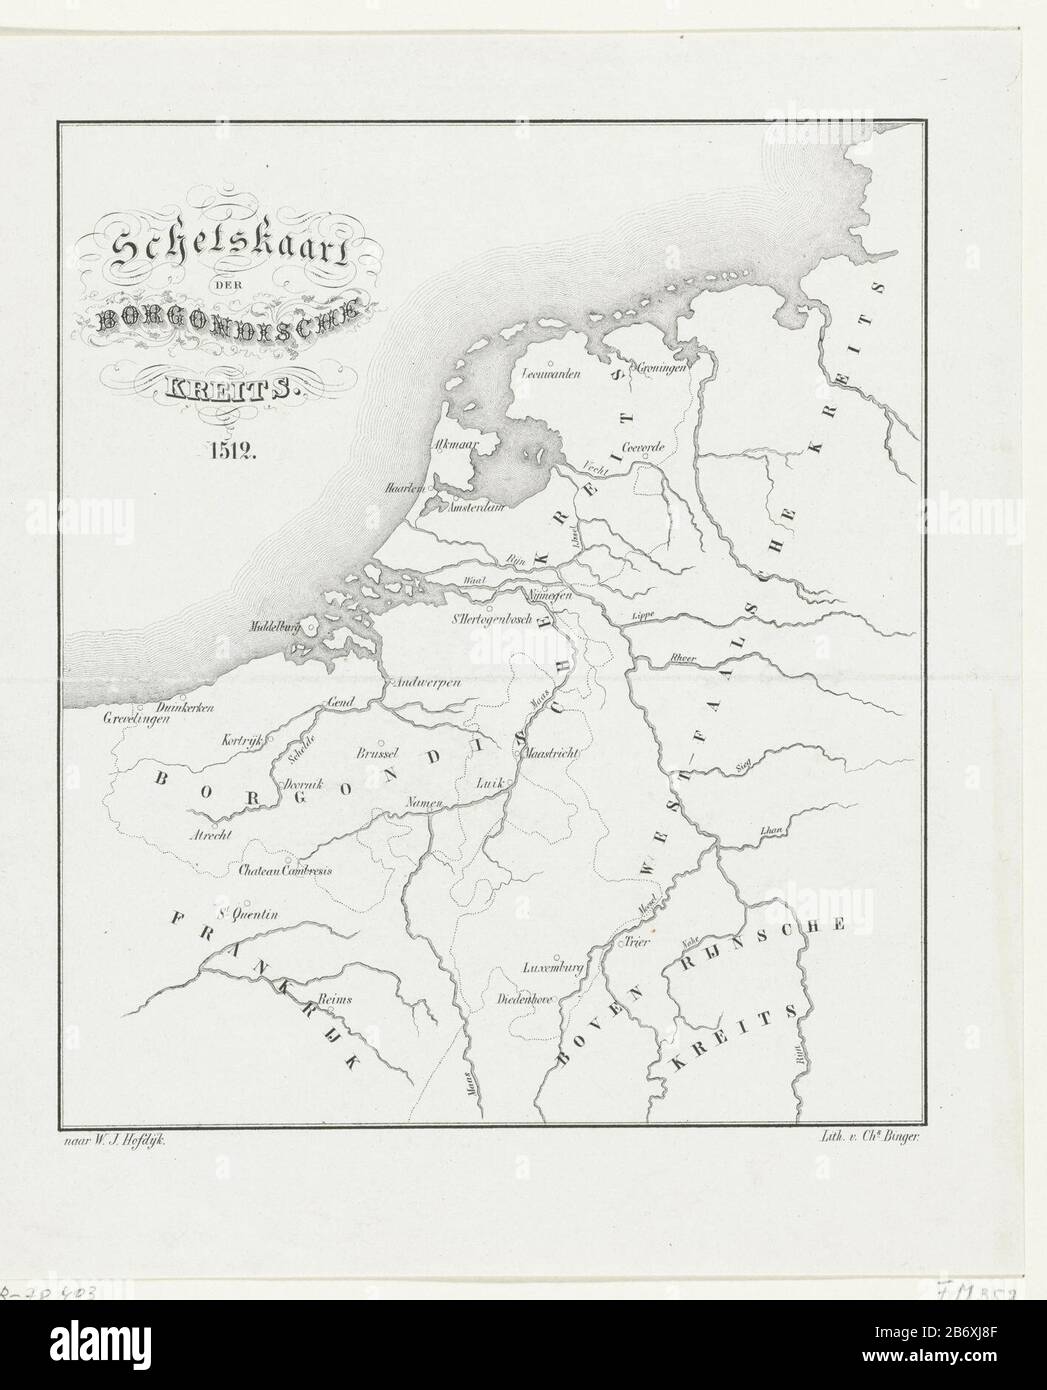 Kaart van de Bourgondische kreits, 1512 Schetskaart der Borgondische Kreits 1512 (titel op object) Map of the Burgundian Circle, 1512 Manufacturer : design by Willem Jacob Hofdijk (listed building) printer Charles Binger (listed property) Place manufacture: Netherlands Date: 1853 - 1861 Physical features: lithography material: paper technique: lithography (technique) Dimensions: paper: h 240 mm × W 203 mmToelichtingIllustratie for Jacob van Lennep, the history of the fatherland in sketches and images, Binger, Amsterdam 1855-1861, 8 parts, pl. XXIII. Subject: maps of separate countries or regio Stock Photo